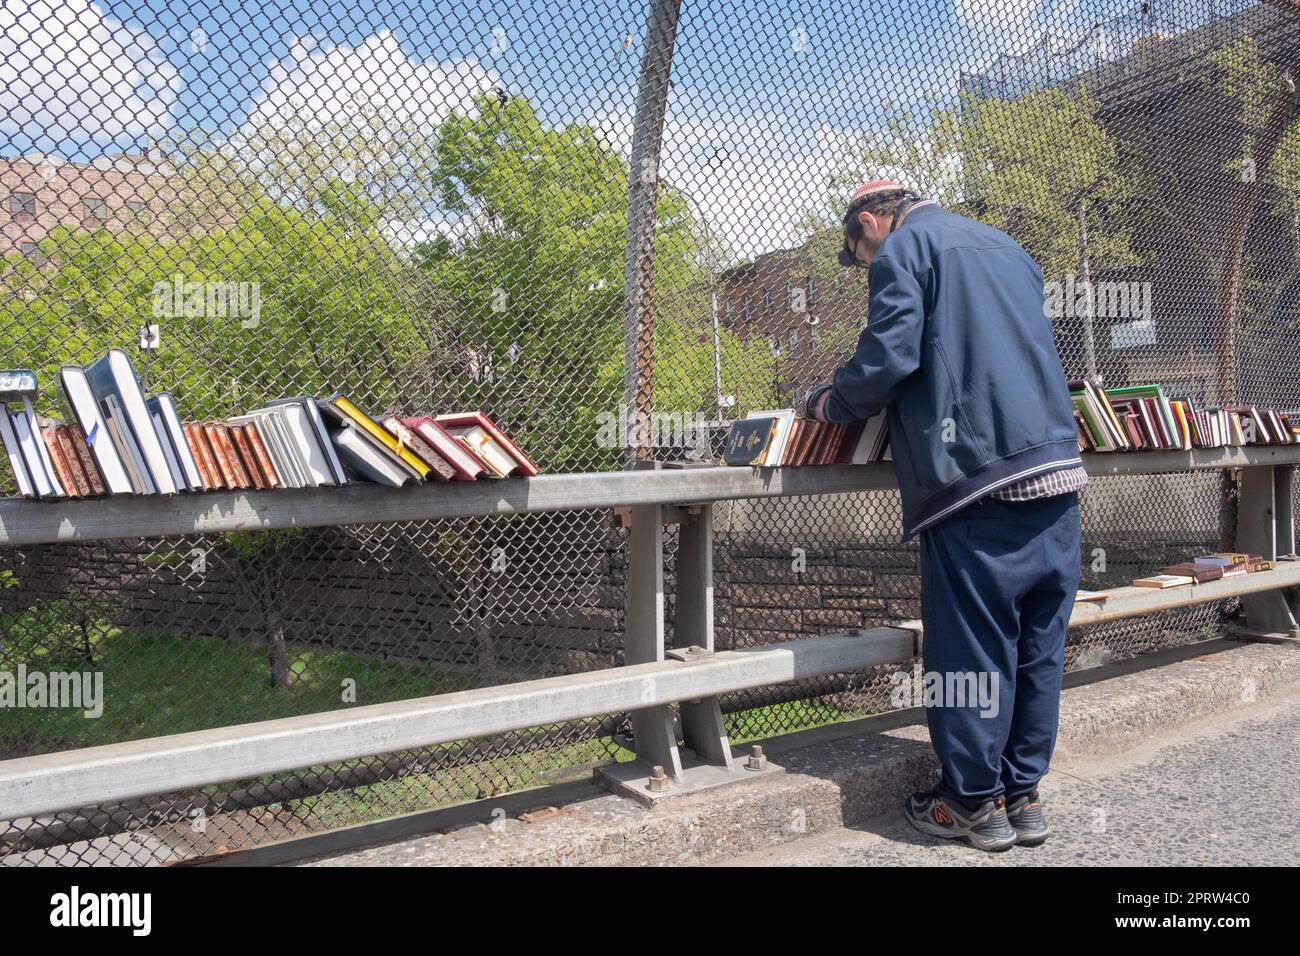 An orthodox Jewish man who sells religious books recites his morning prayers while wearing tefillin (phylacteries). Overlooking the BQE in NYC. Stock Photo